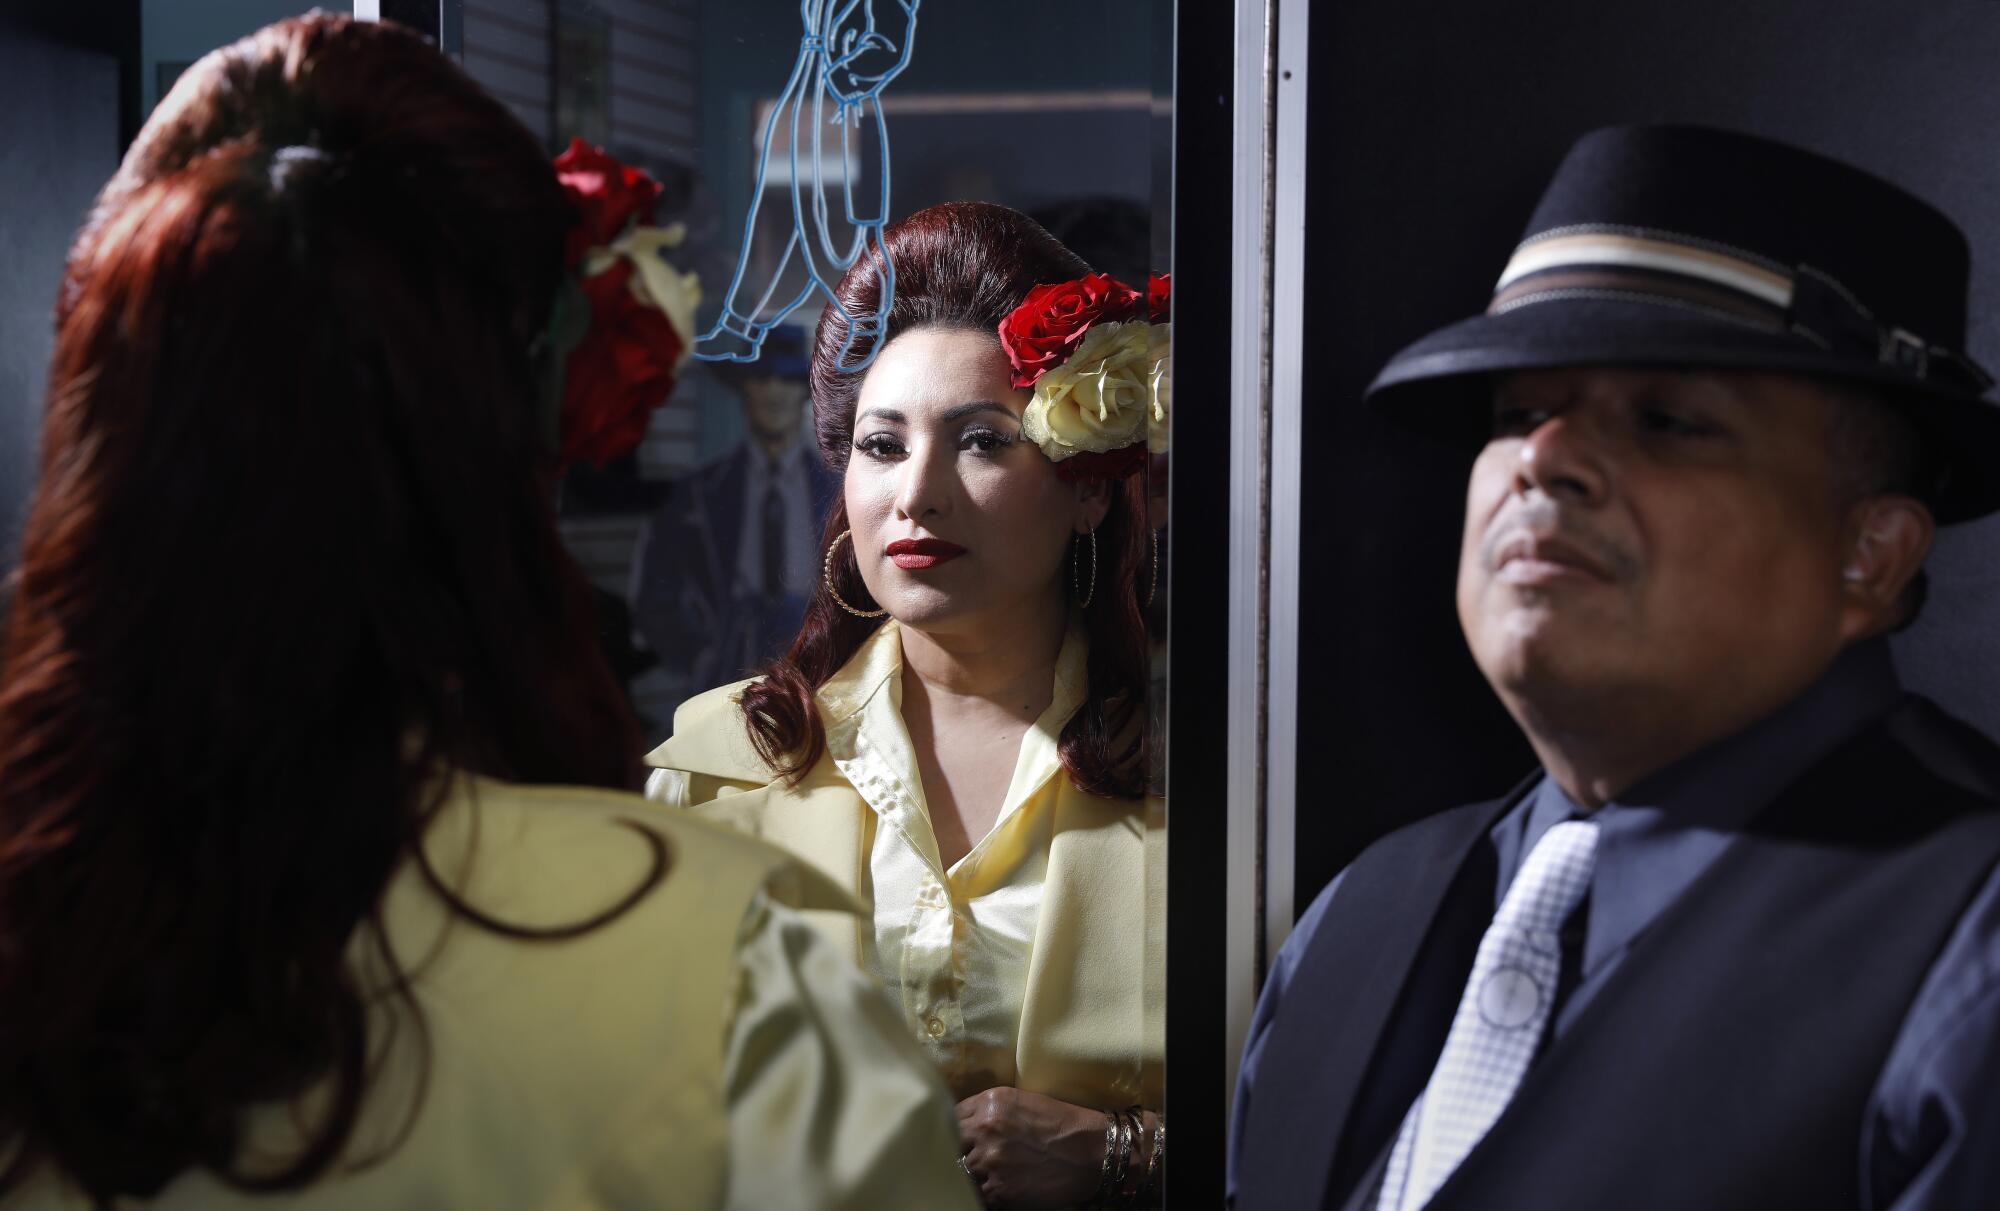 A woman wearing a 1940s hairdo and a bright yellow suit is seen in reflection next to a man wearing a dapper tie and hat